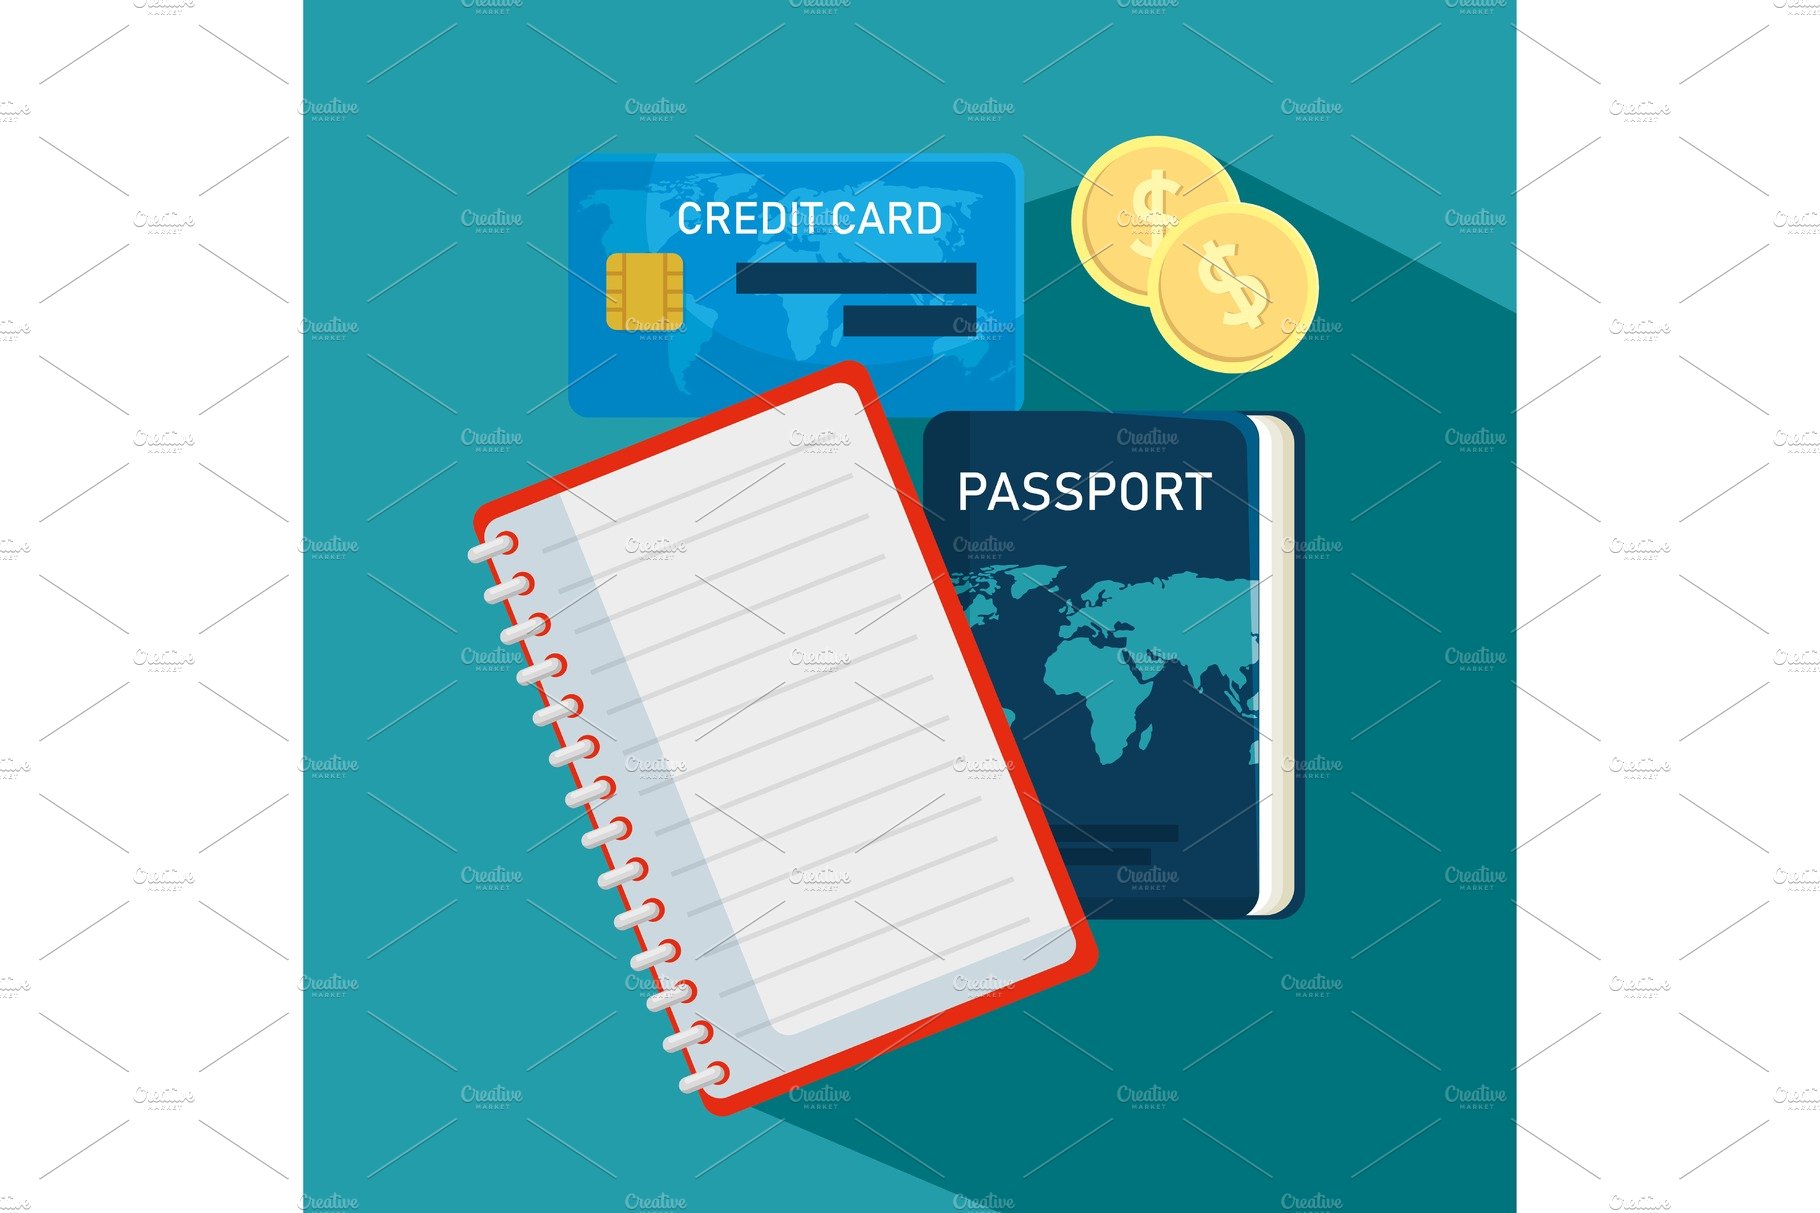 credit card with travel passport and cover image.